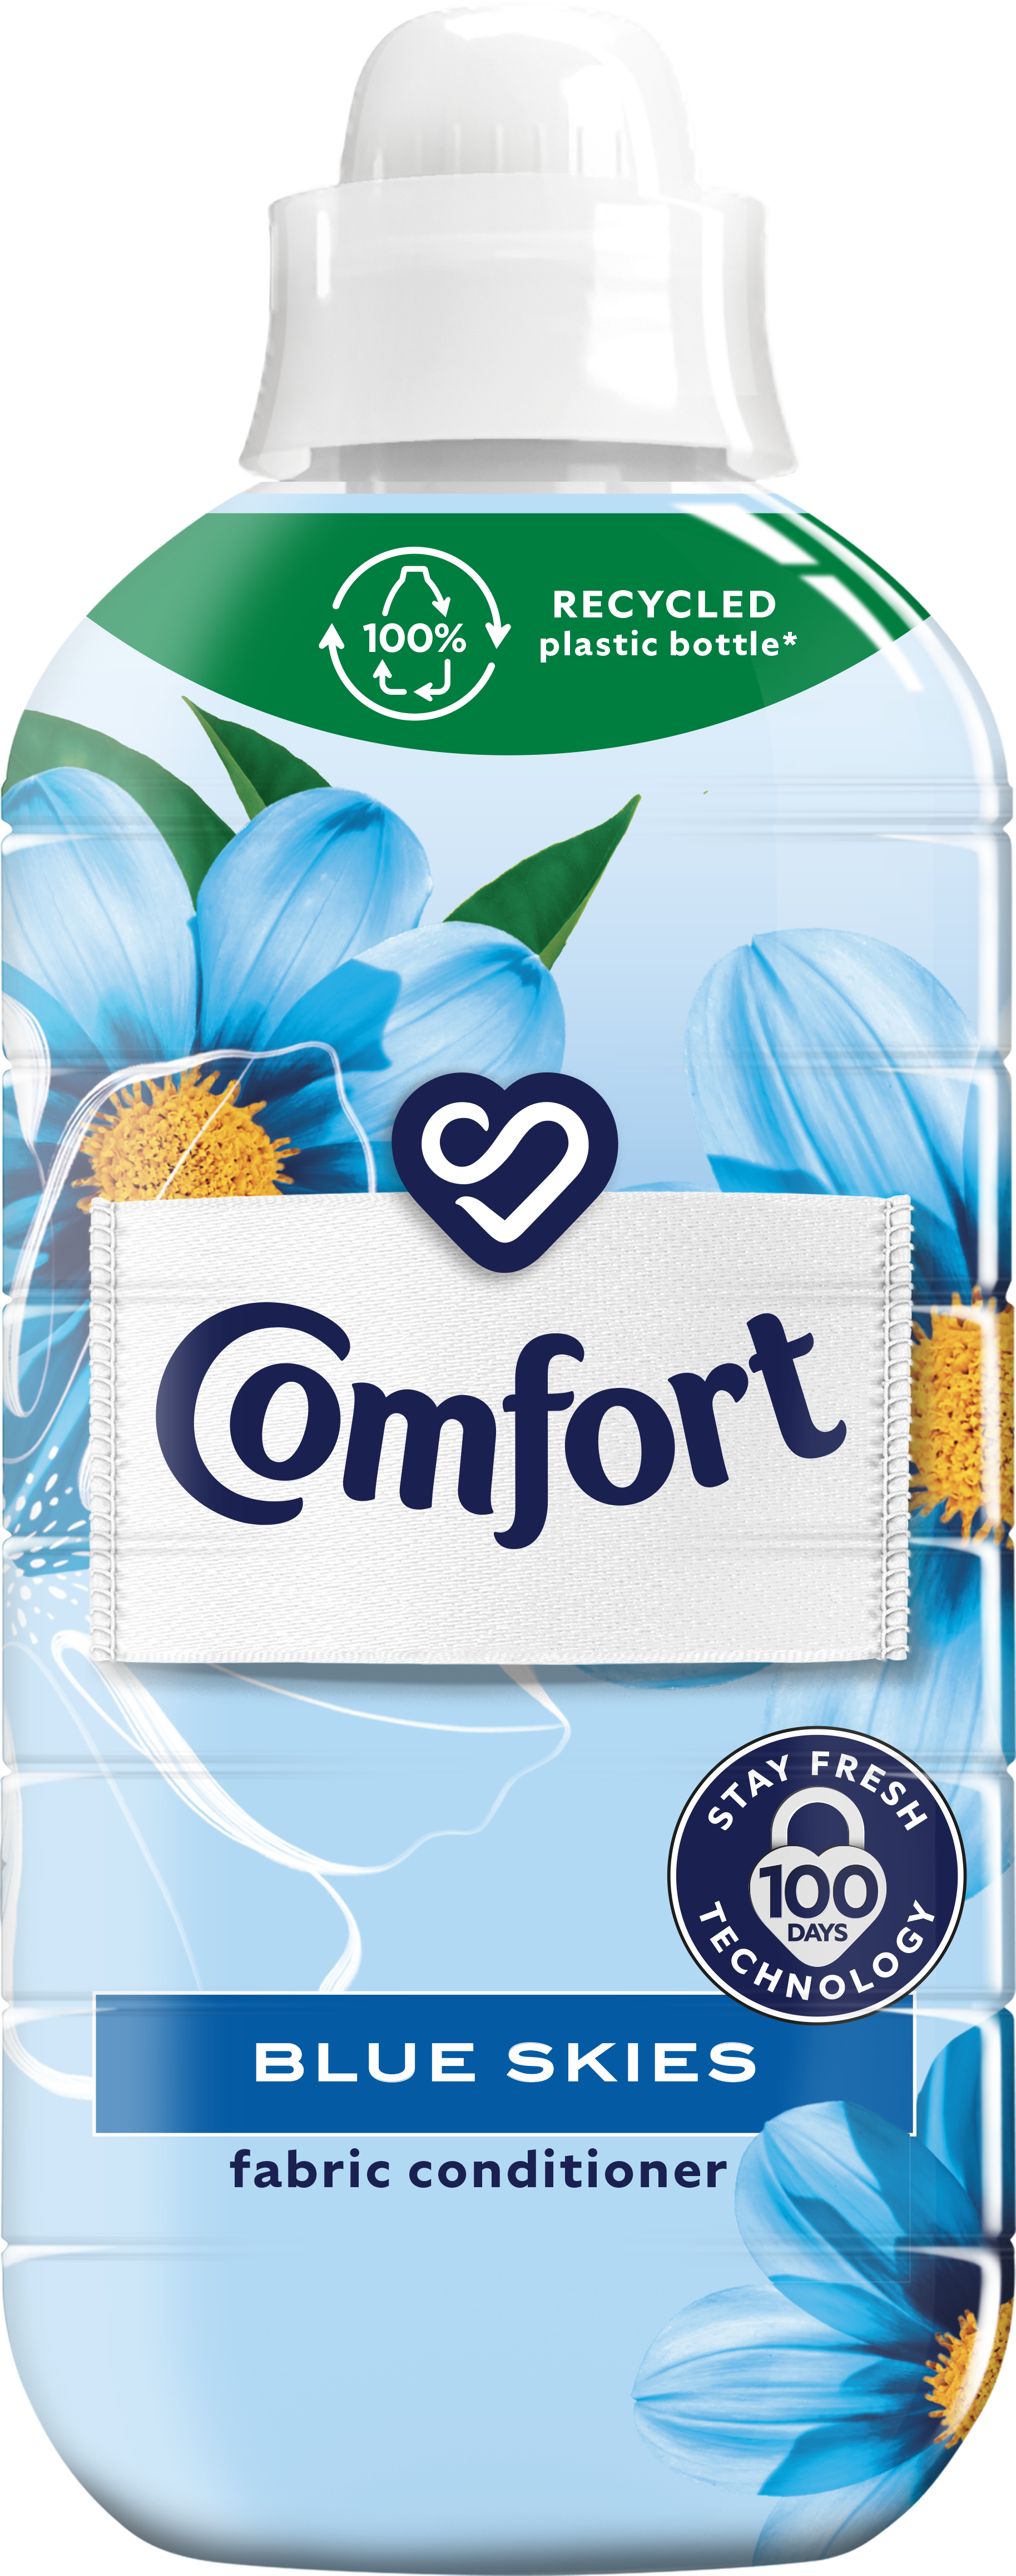 Comfort concentrates on sustainability with relaunch of fabric conditioners